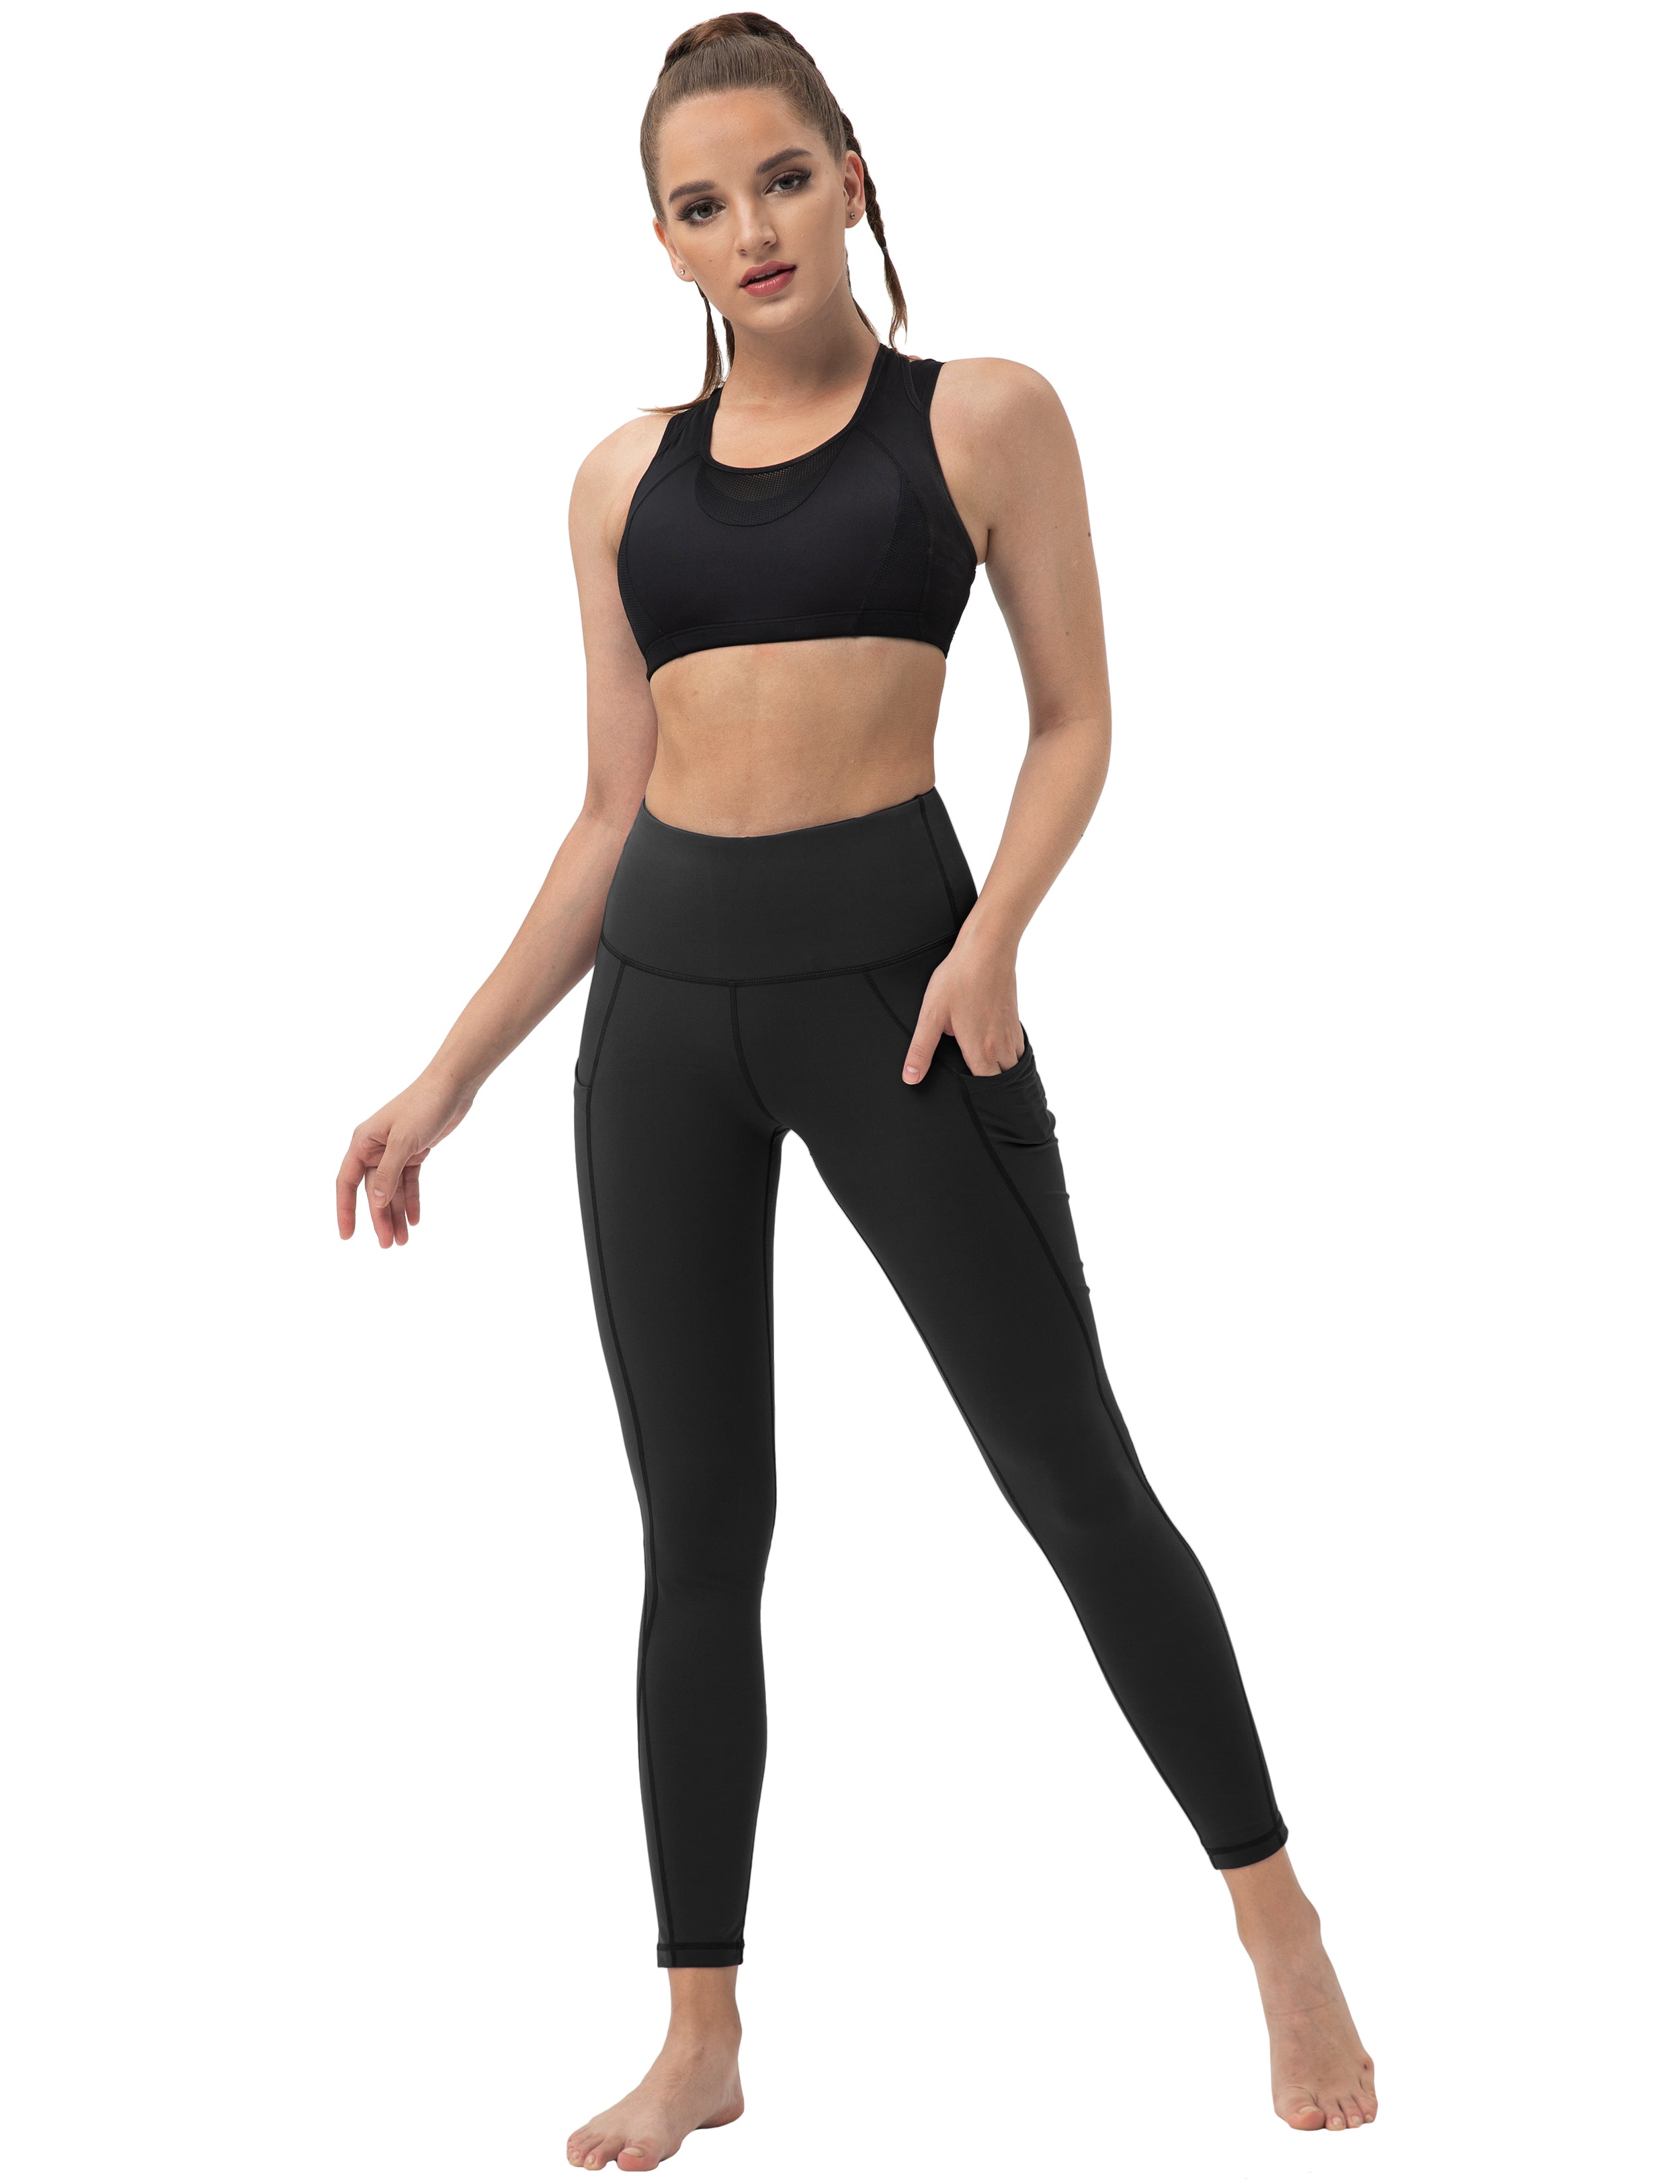 High Waist Side Pockets Golf Pants black 75% Nylon, 25% Spandex Fabric doesn't attract lint easily 4-way stretch No see-through Moisture-wicking Tummy control Inner pocket